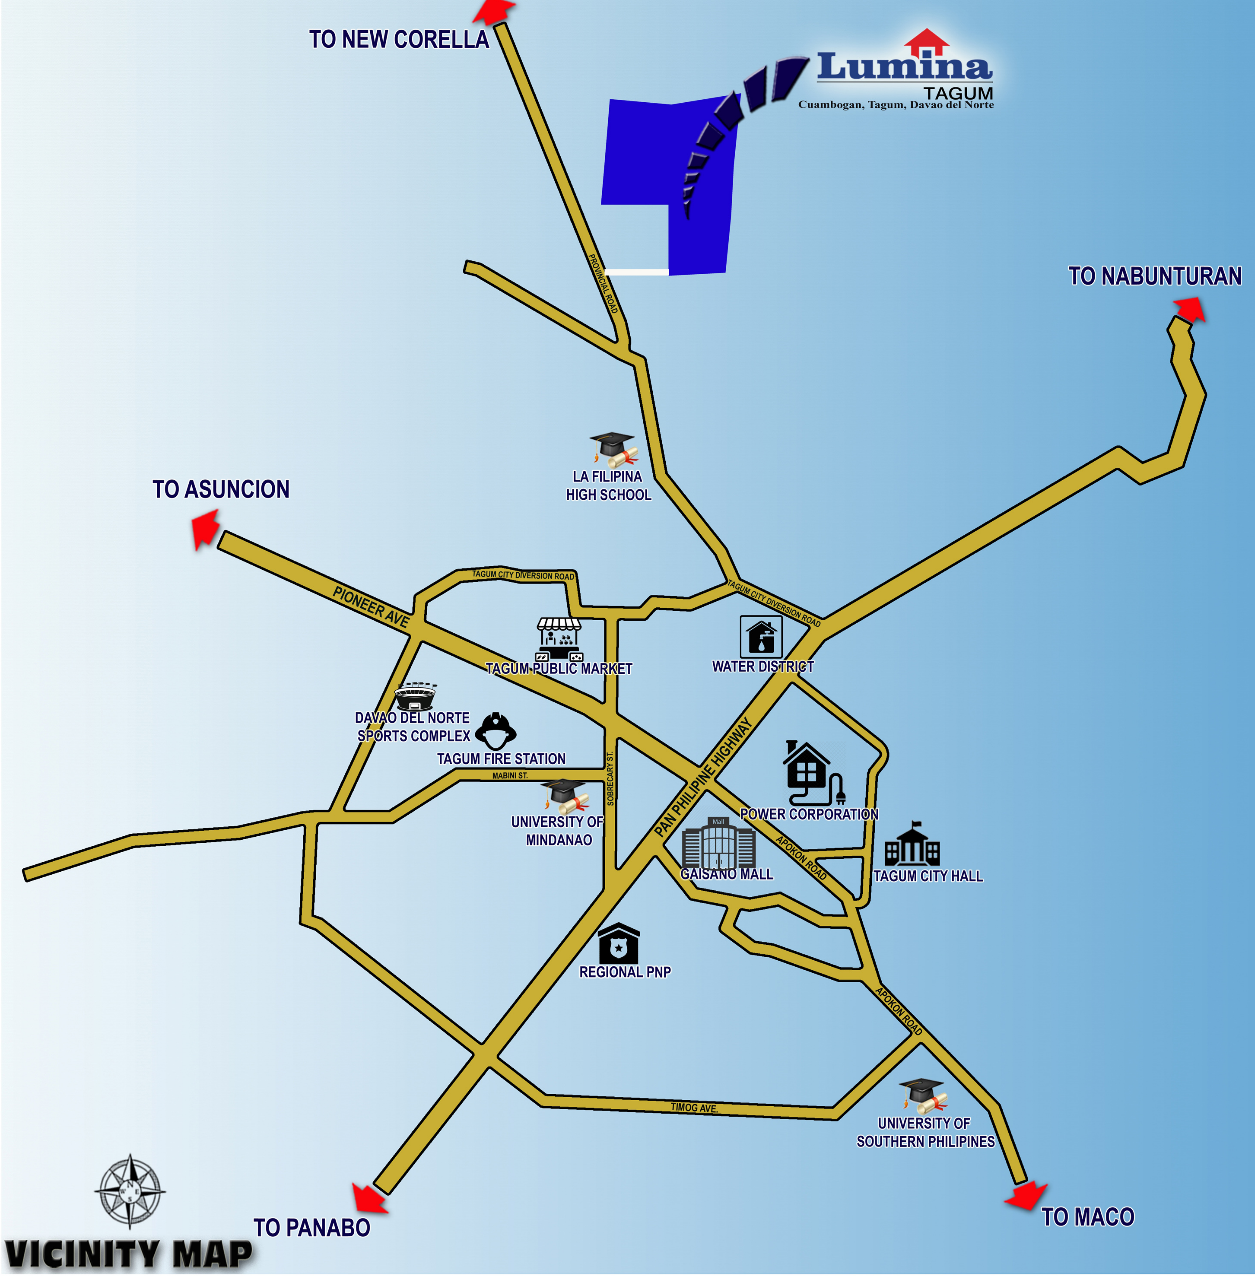 VICINITY-MAP-1642485864.png